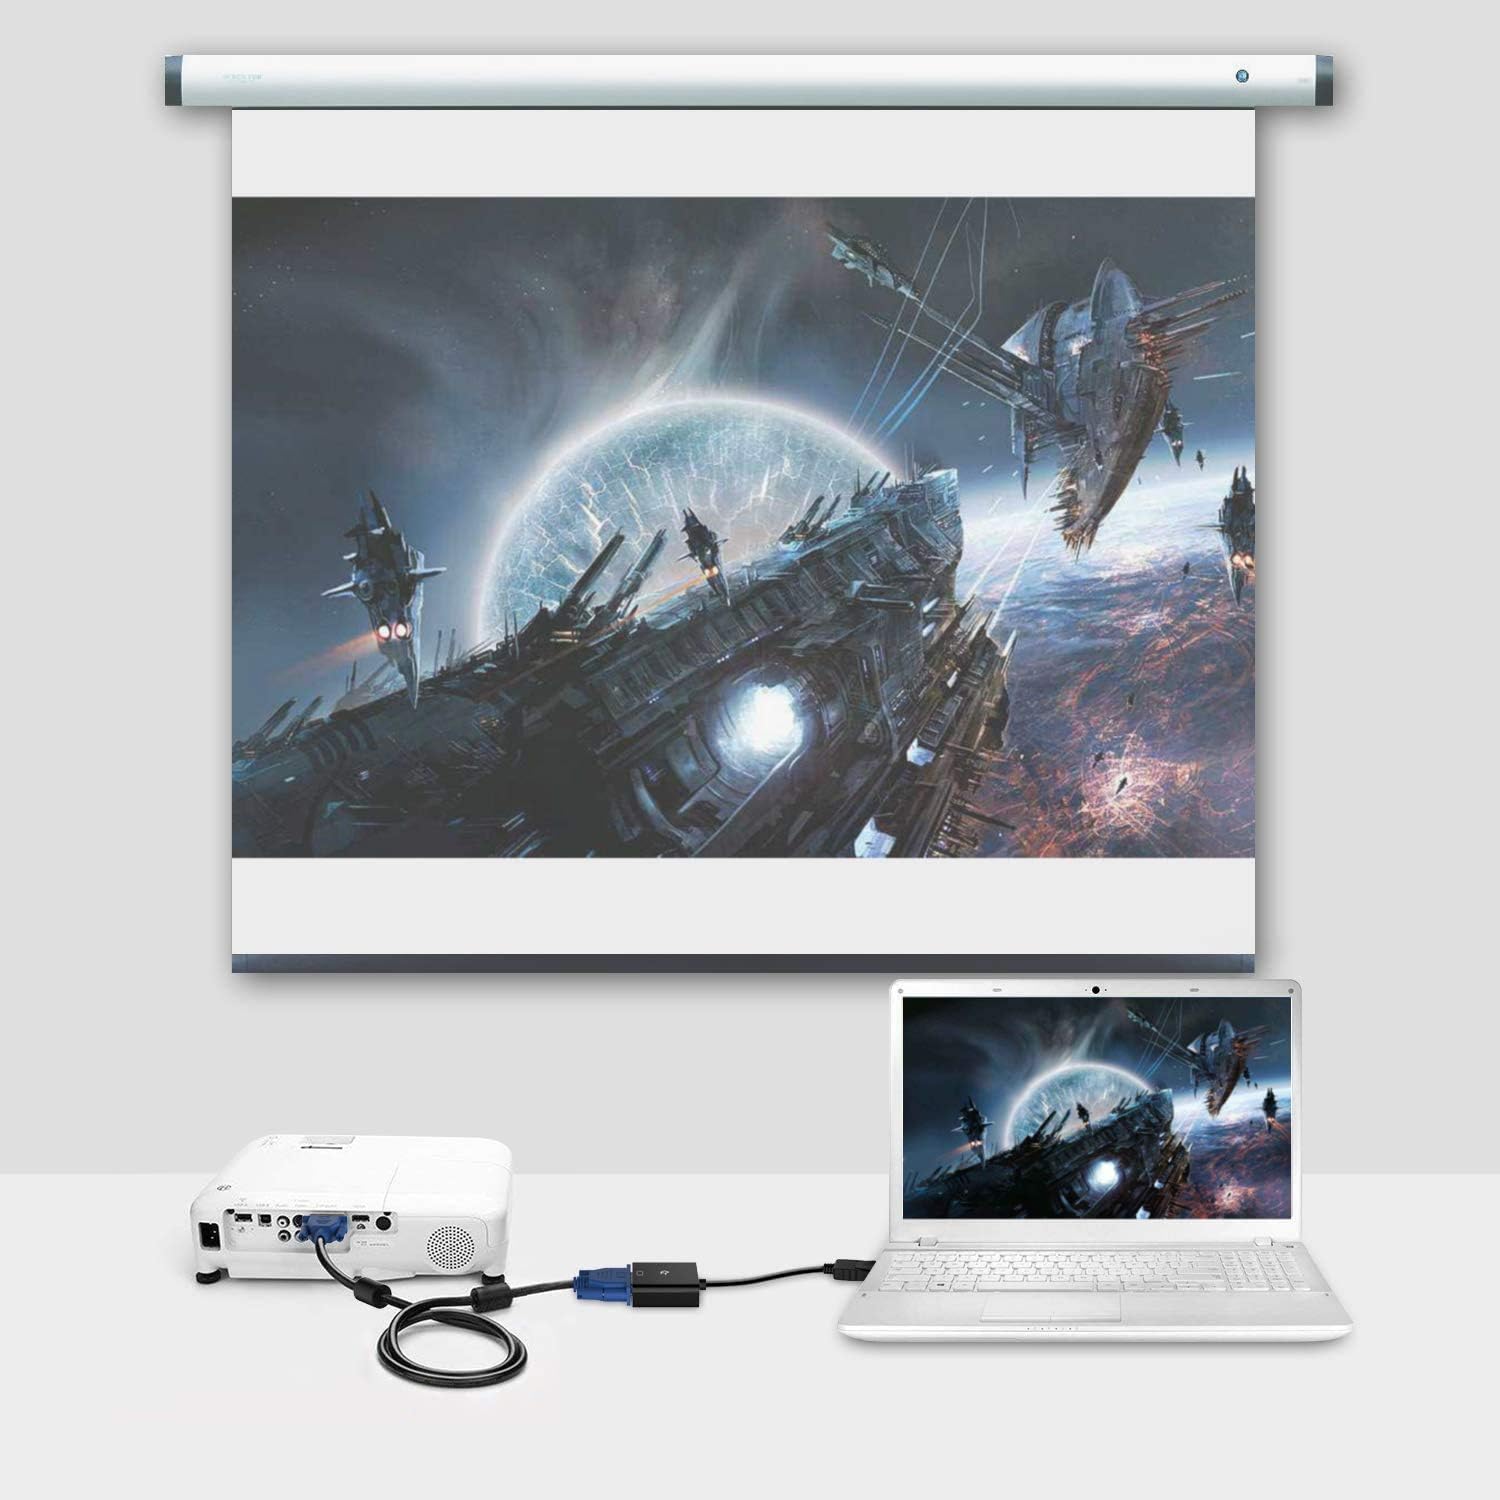 Quality Assured Male to Male VGA Cable Support Monitor/PC/LCD/LED, Plasma, Projector, TFT (LST-VGACBLE-1.5M) - 3M